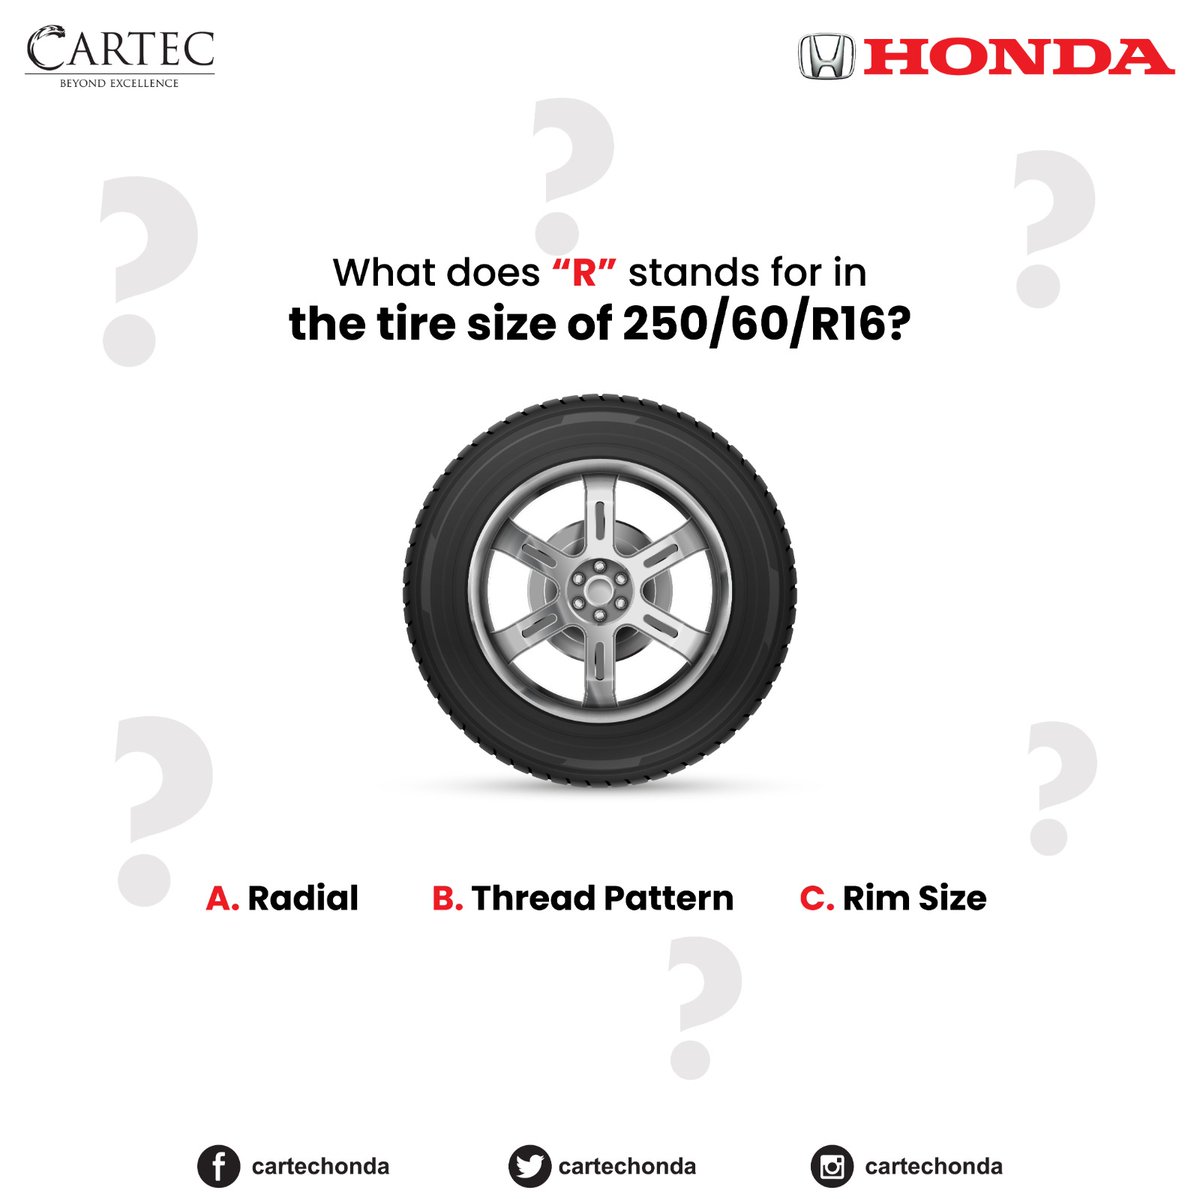 𝐐𝐮𝐢𝐳 𝐓𝐢𝐦𝐞!!
Test your car knowledge with this little riddle.

#CartecHonda #ConceptGroup #BeyondExcellence #HondaCarDealer #Honda #Hondalndia #QuizTime #quizcompetition #GuessTheCar #quiz #ExcitingPrizes